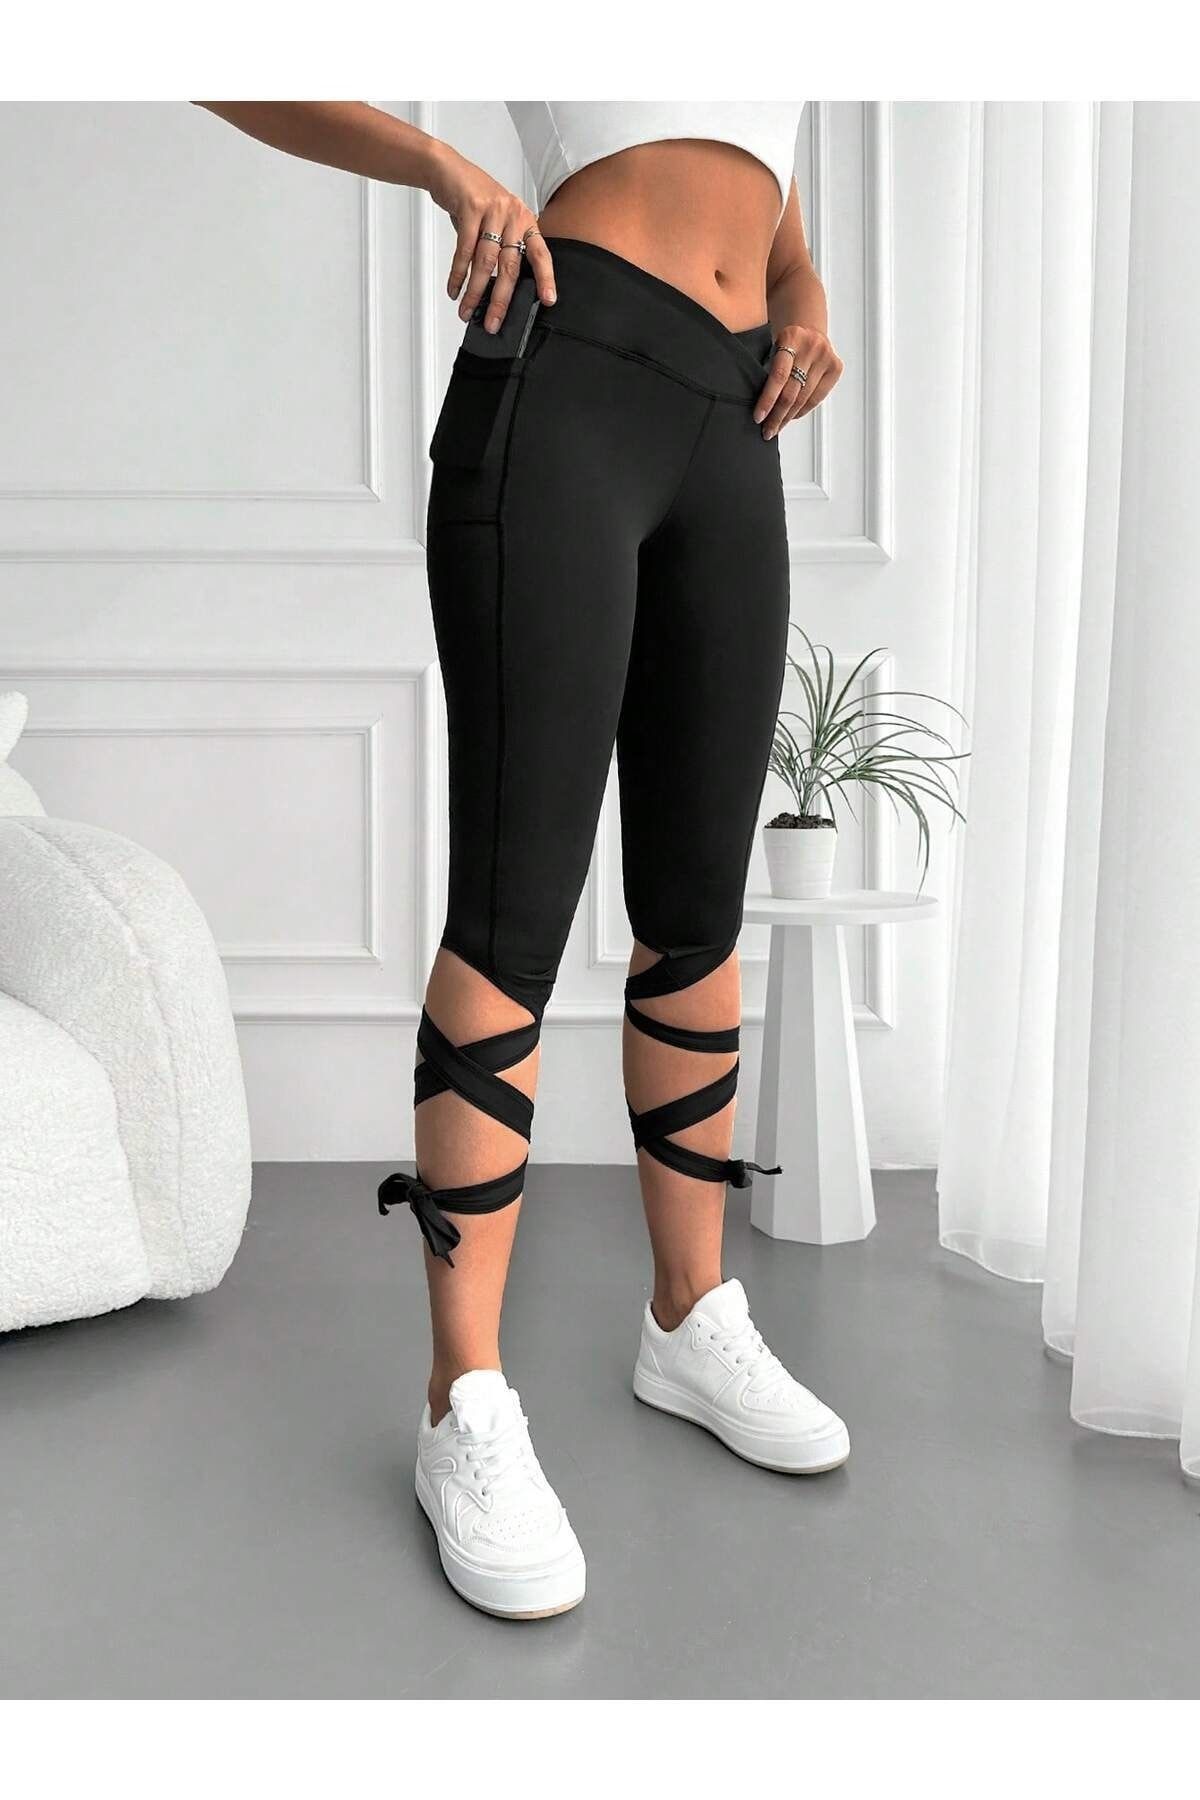 High-Waisted Criss Cross Leggings Clothing in Black - Get great